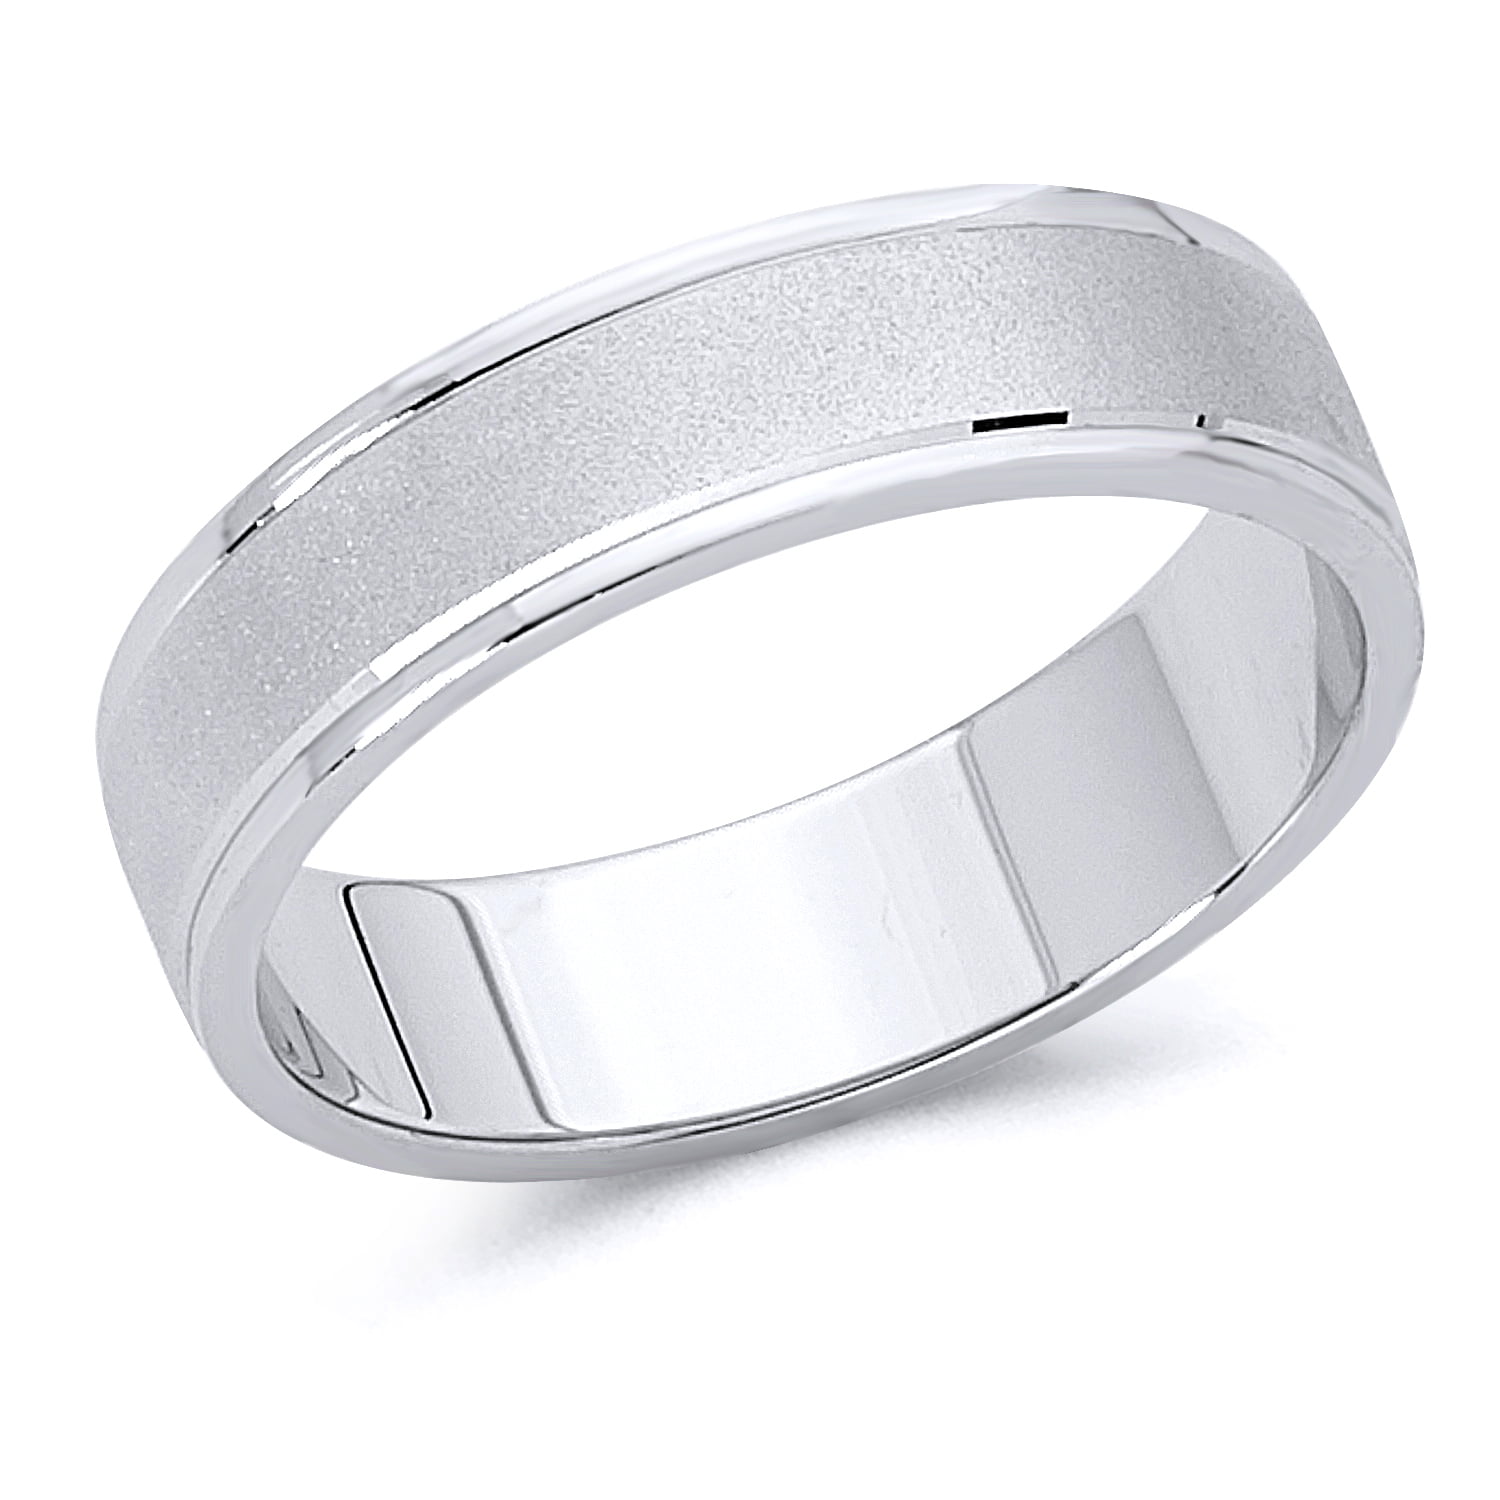 Wellingsale 14k White Gold Polished Satin 5MM Rounded Edge Classic Fit Wedding Band Ring 